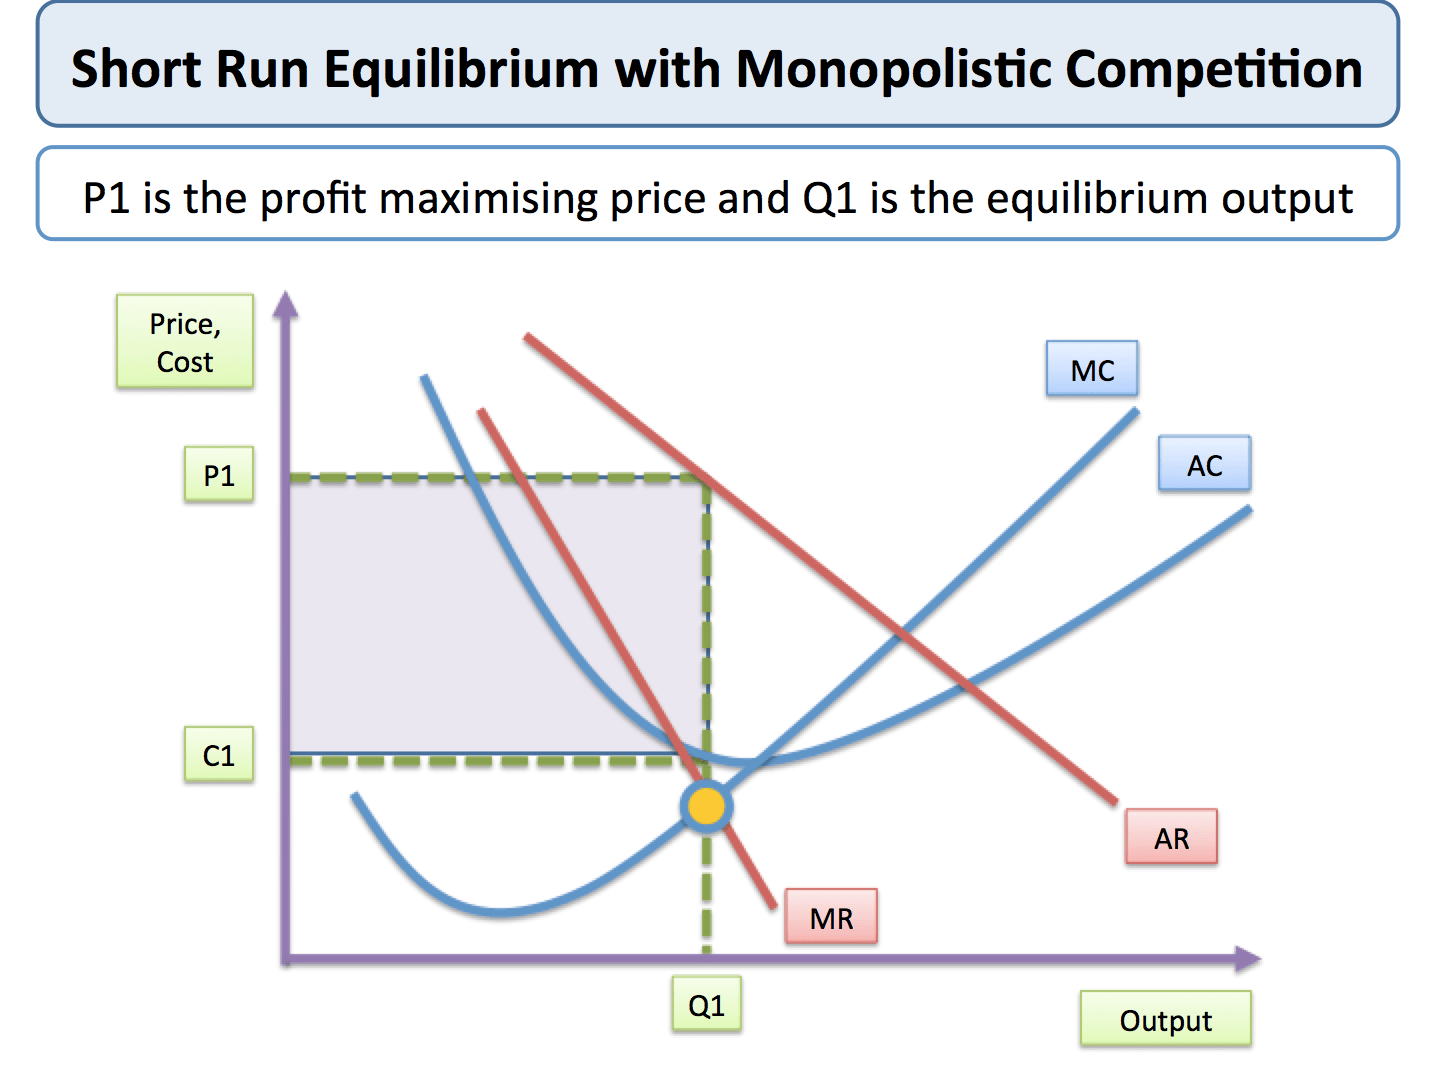 Short Run Equilibrium with Monopolistic Competition PI is the profit
maximising price and QI is the equilibrium output Price, Cost MC AC AR
Output 